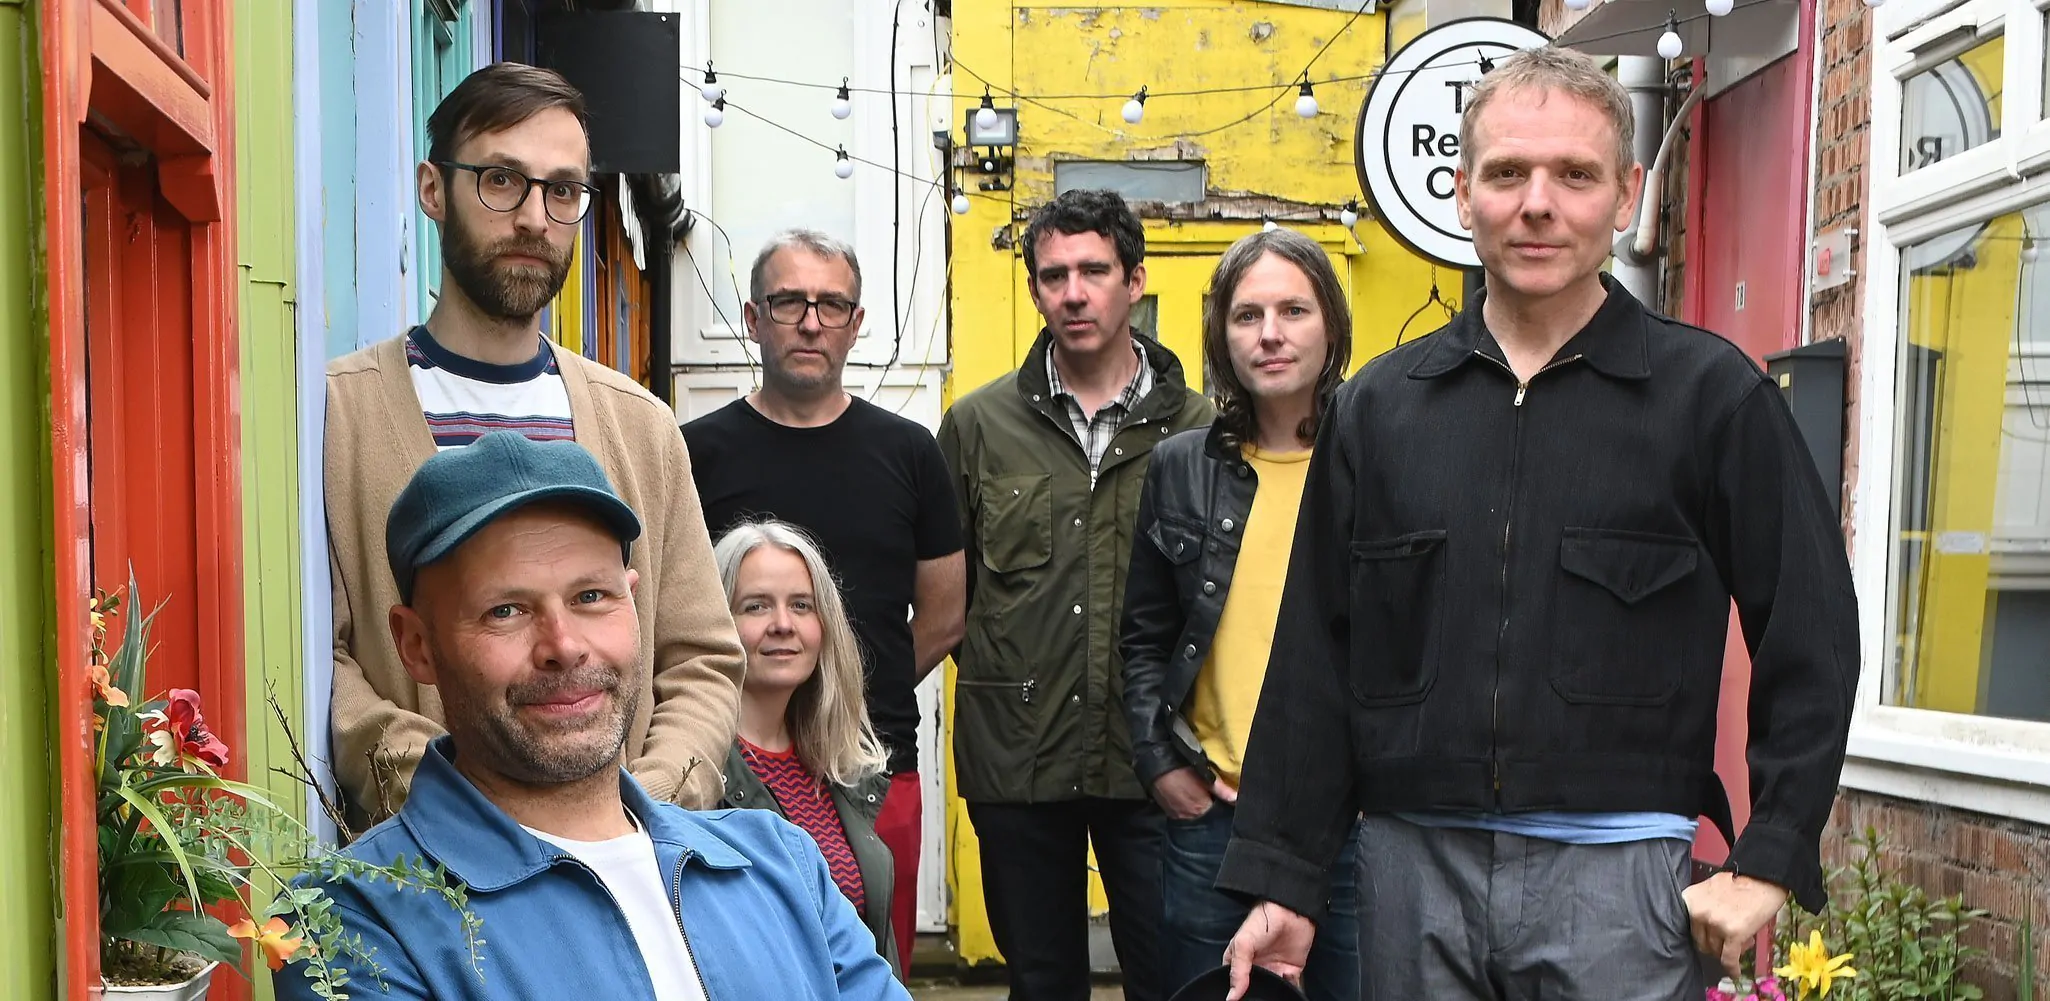 BELLE AND SEBASTIAN release the video for new single ‘This Letter’ – Watch Now